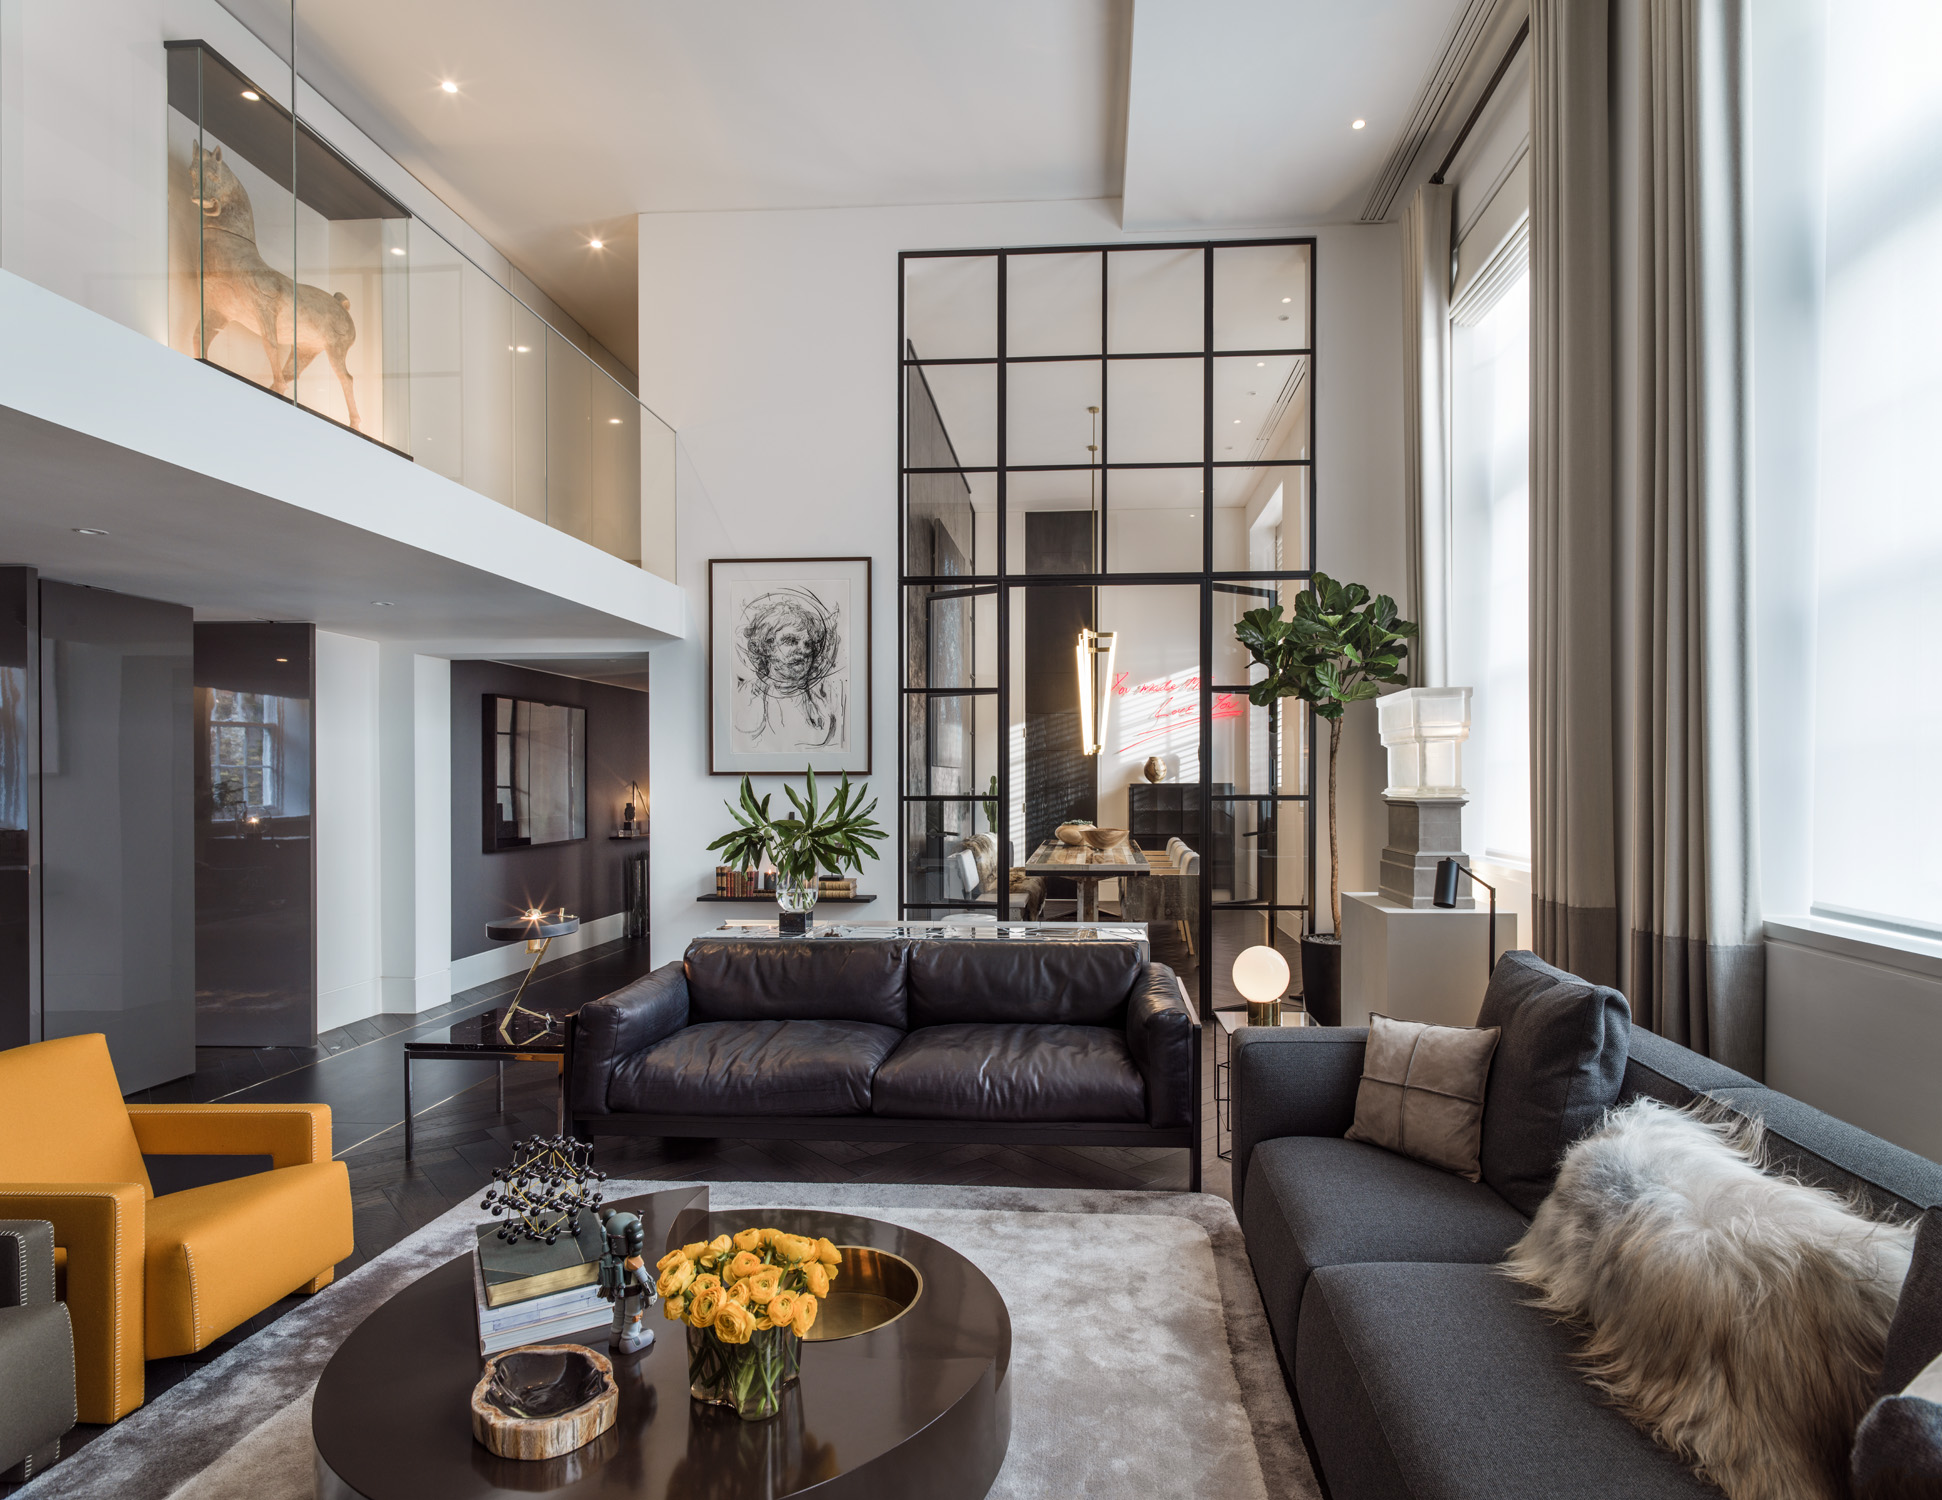 Living room by Kelly Hoppen - luxury and minimalist interior design studio in London